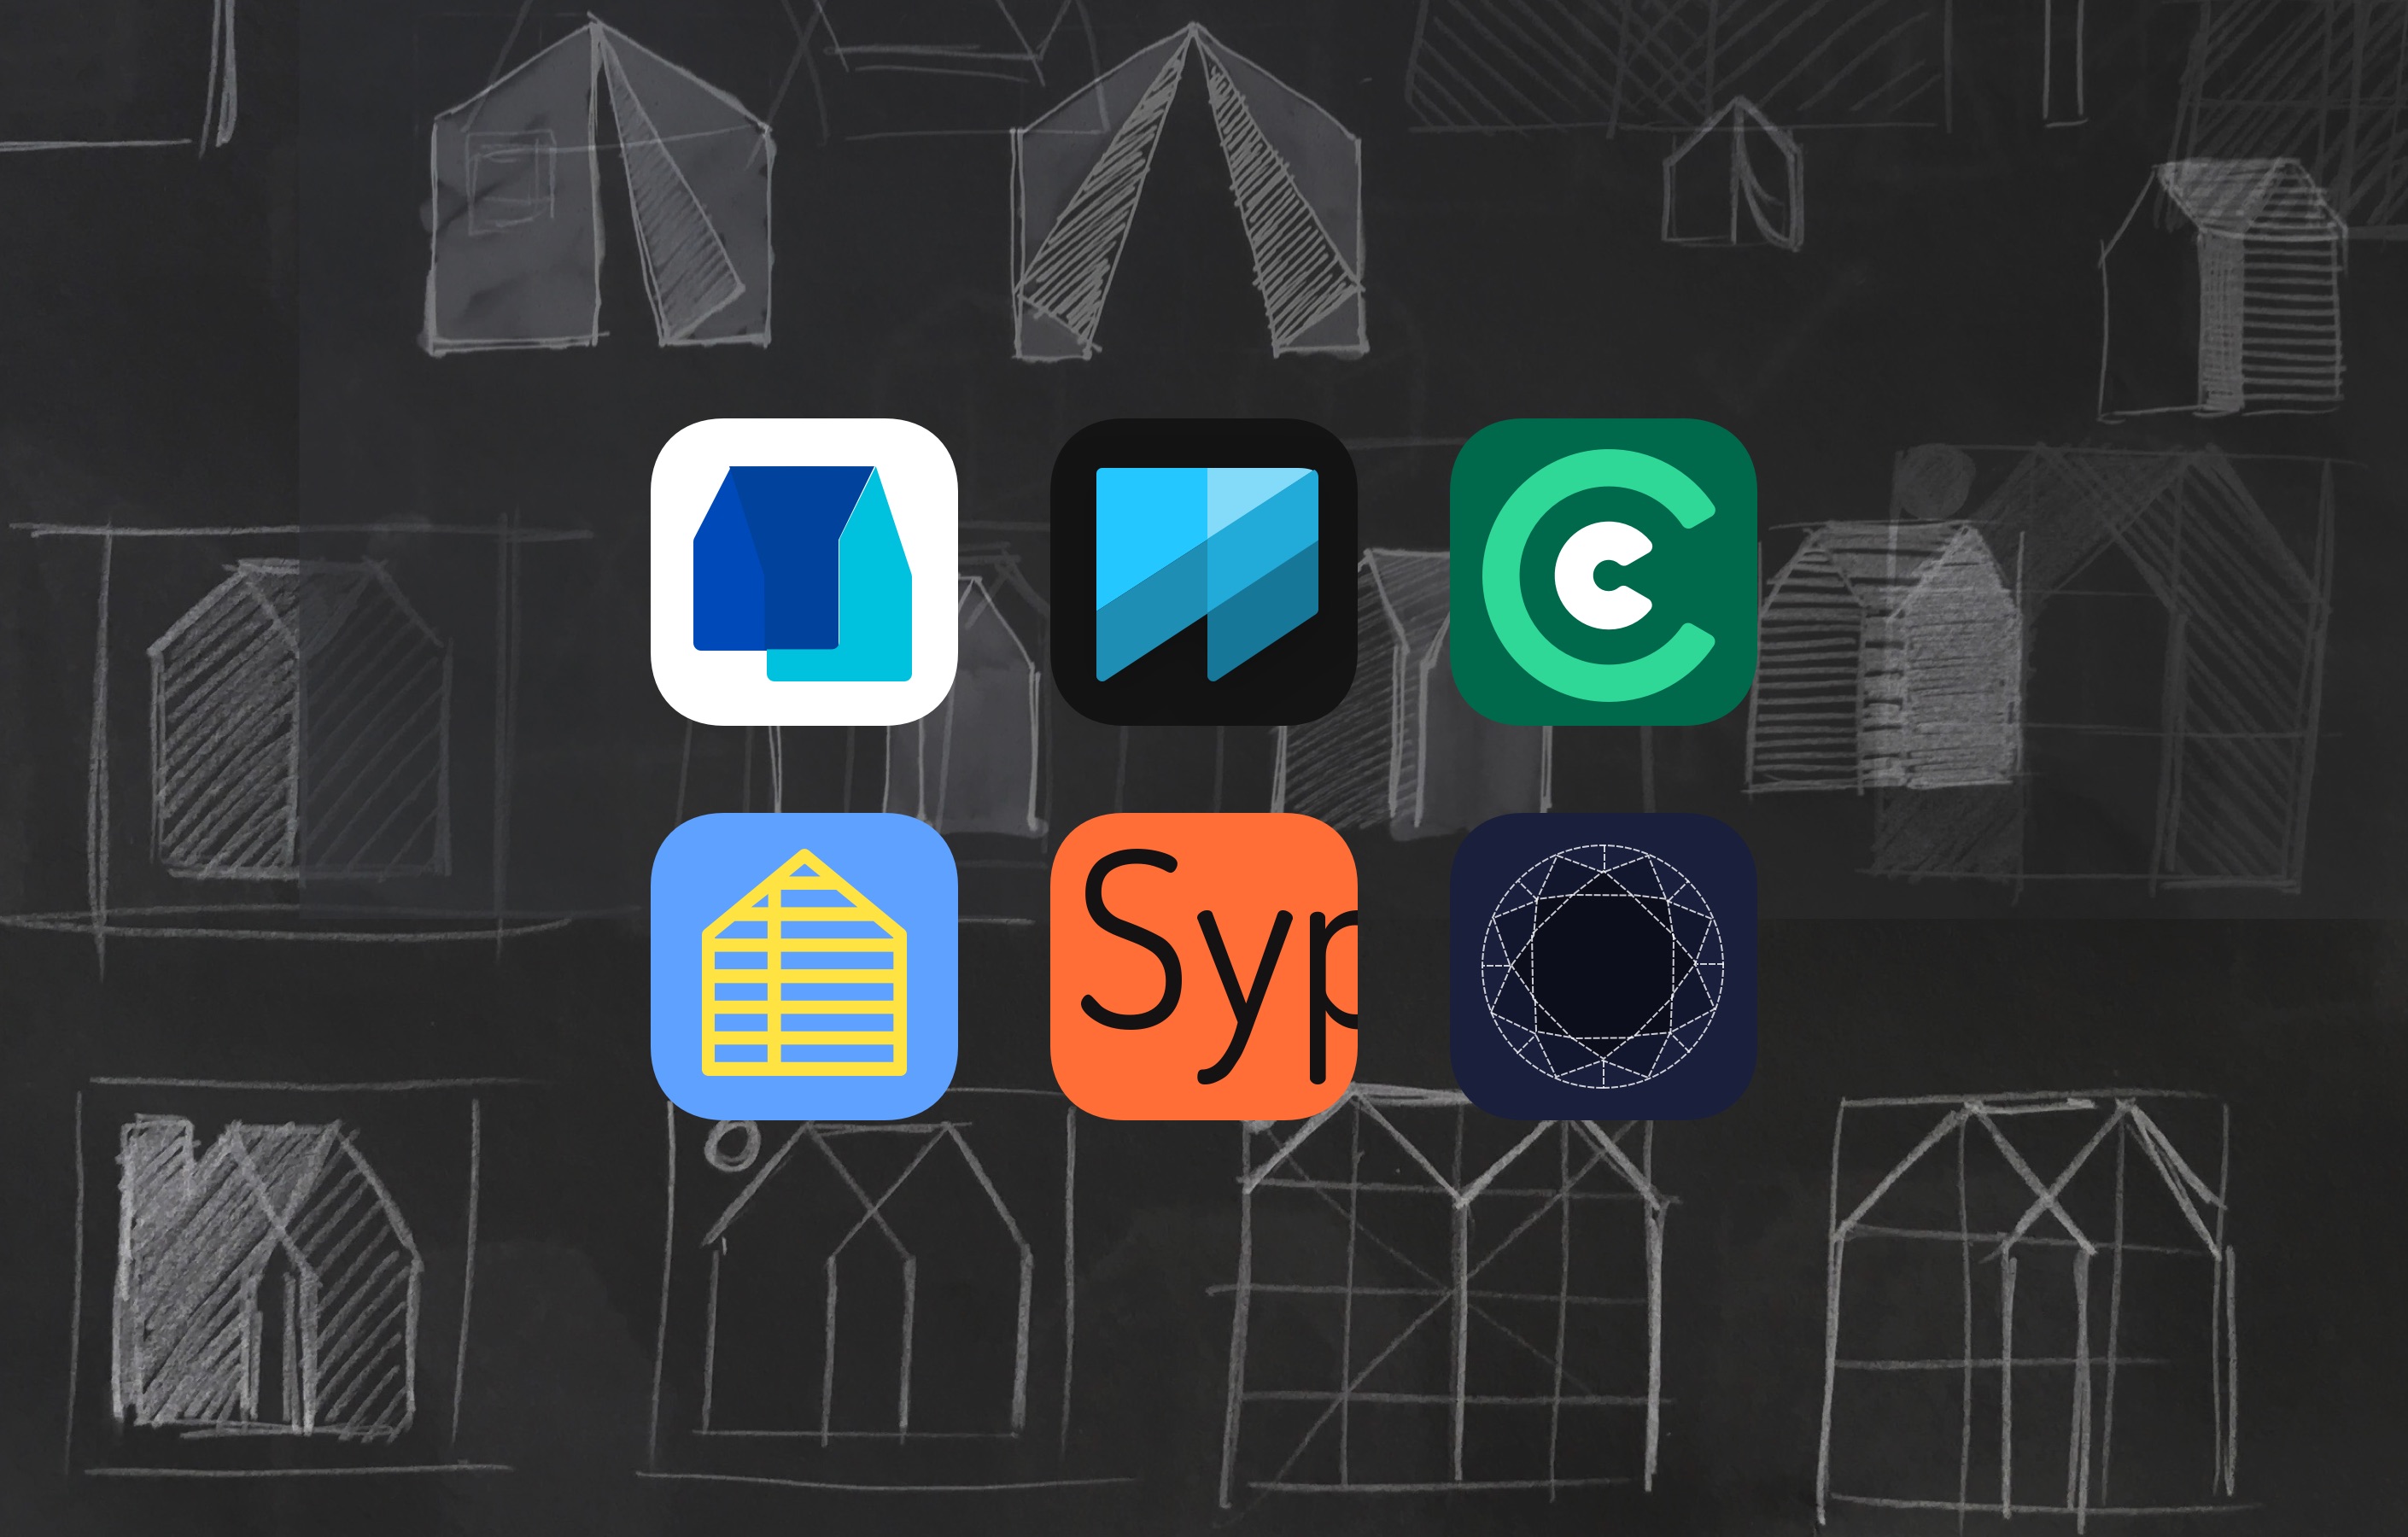 App icons for new product brands